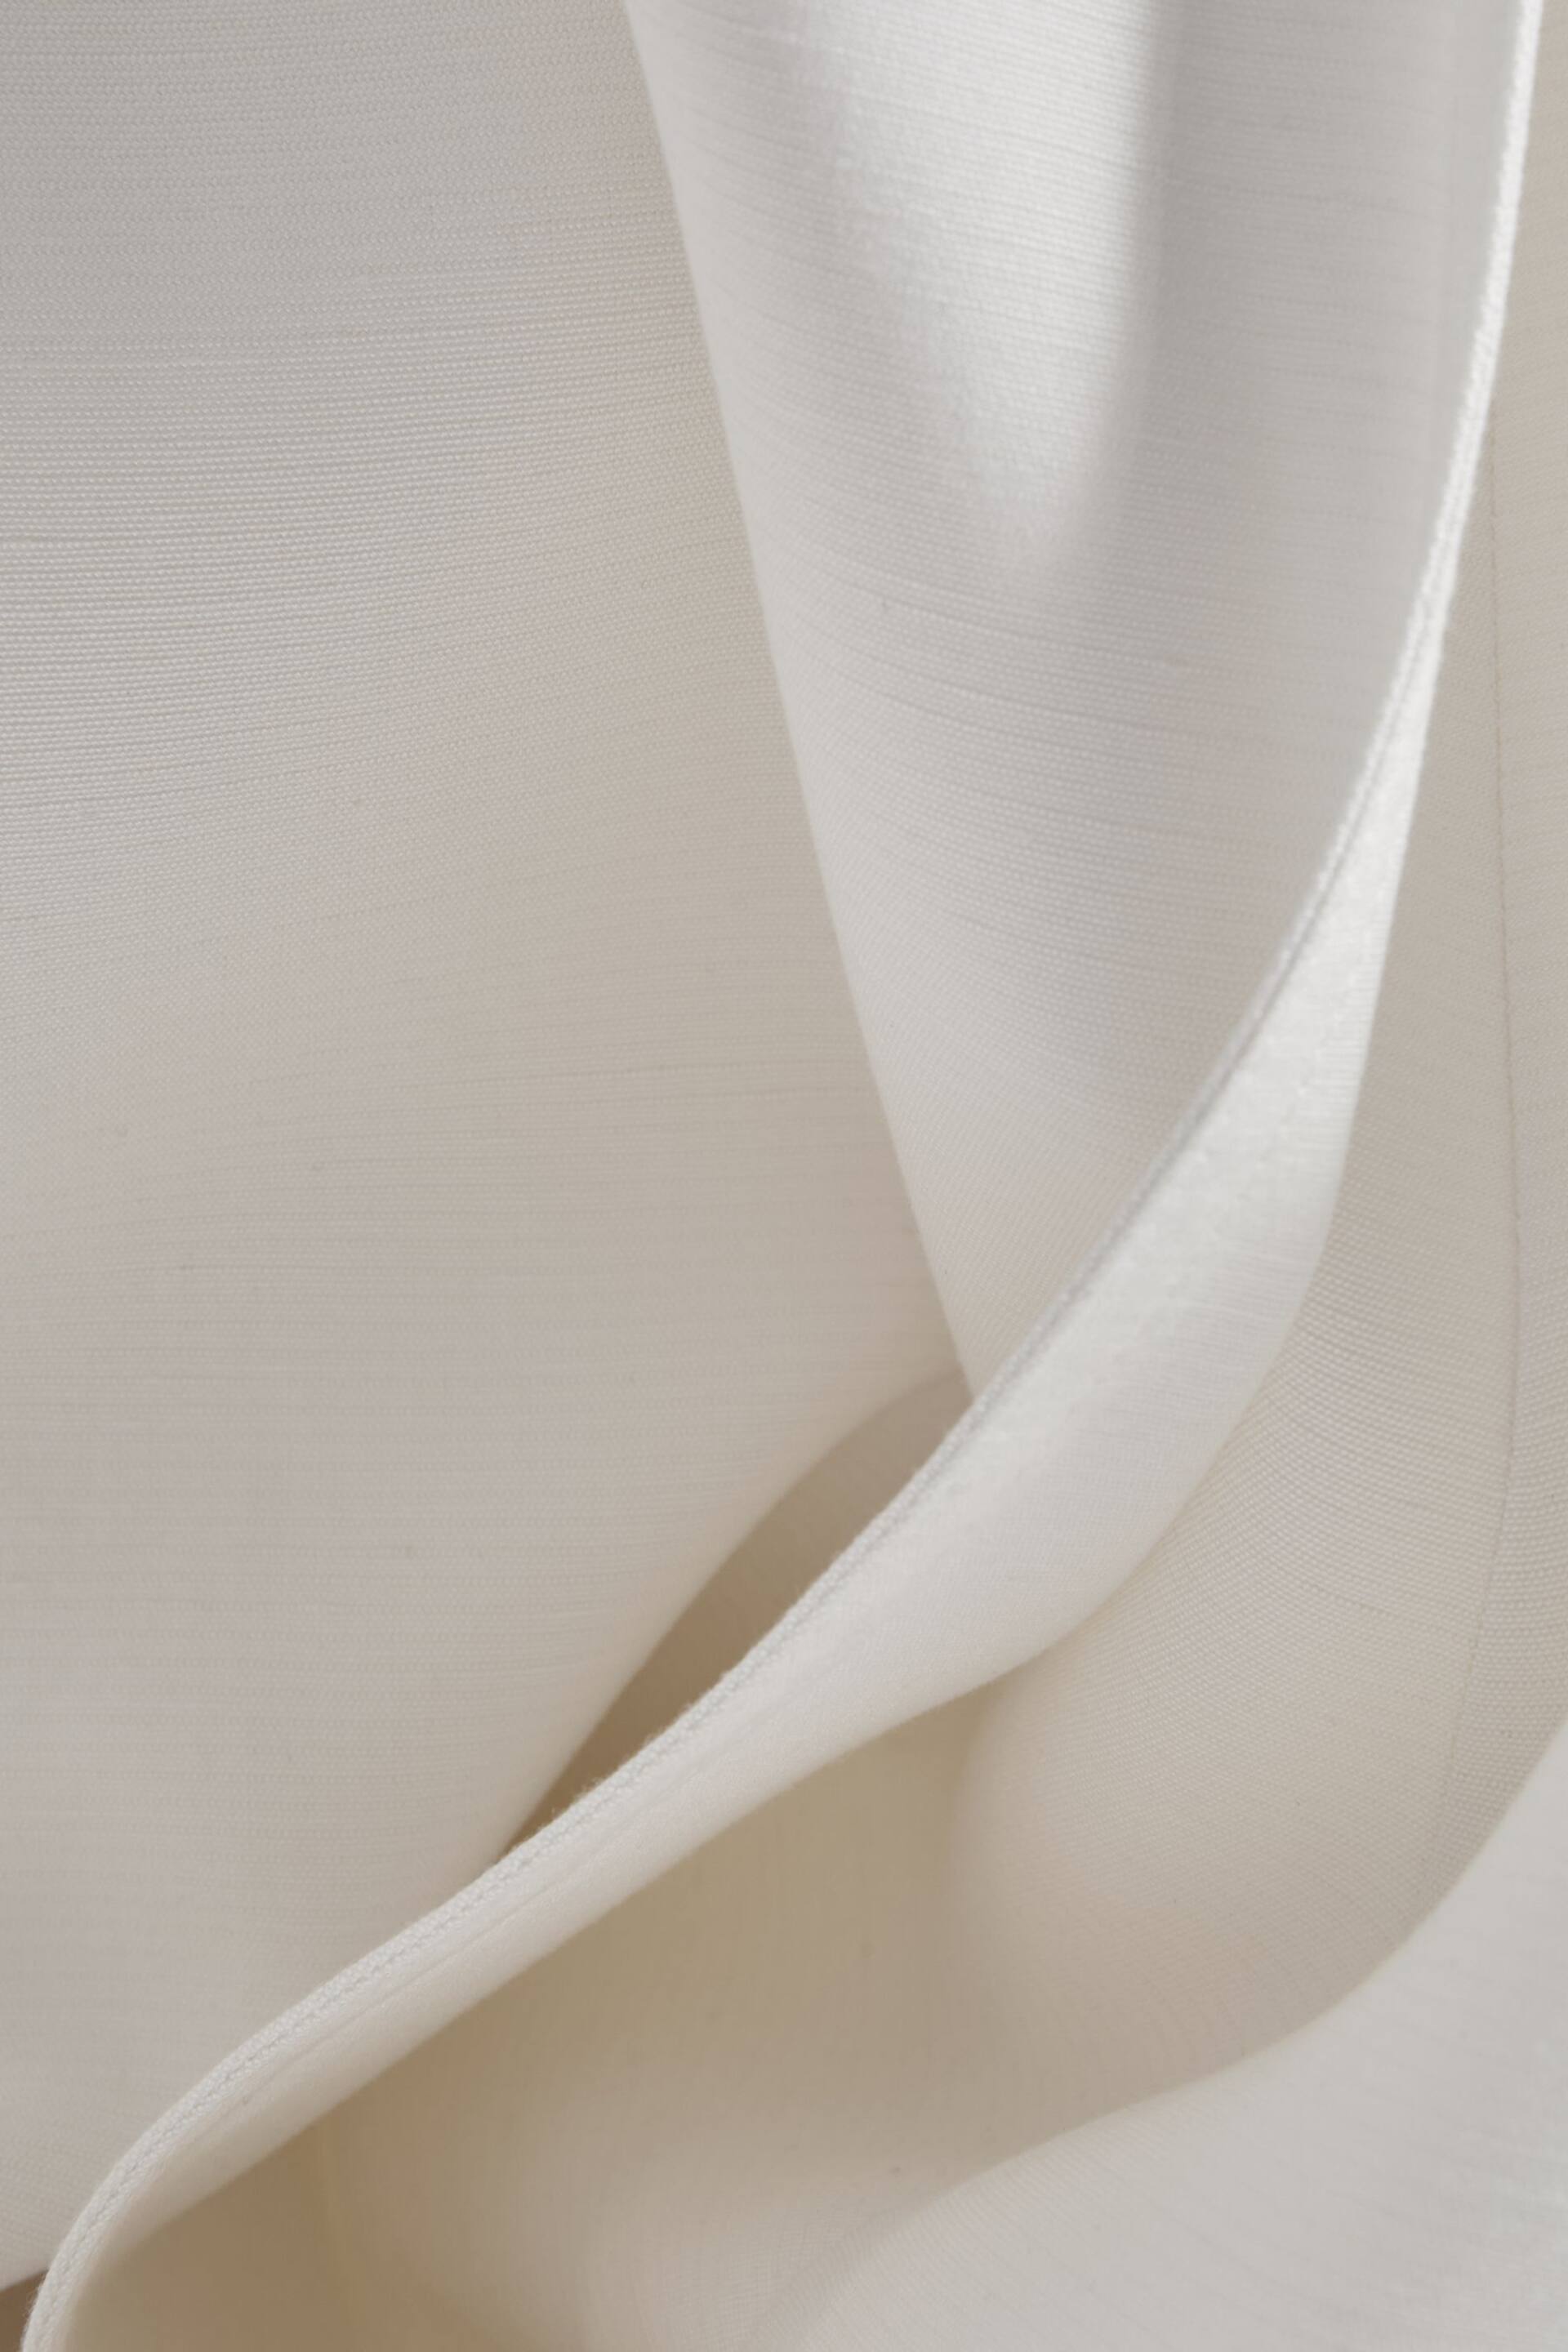 Atelier Italian Textured Wrap Dress with Silk - Image 5 of 6